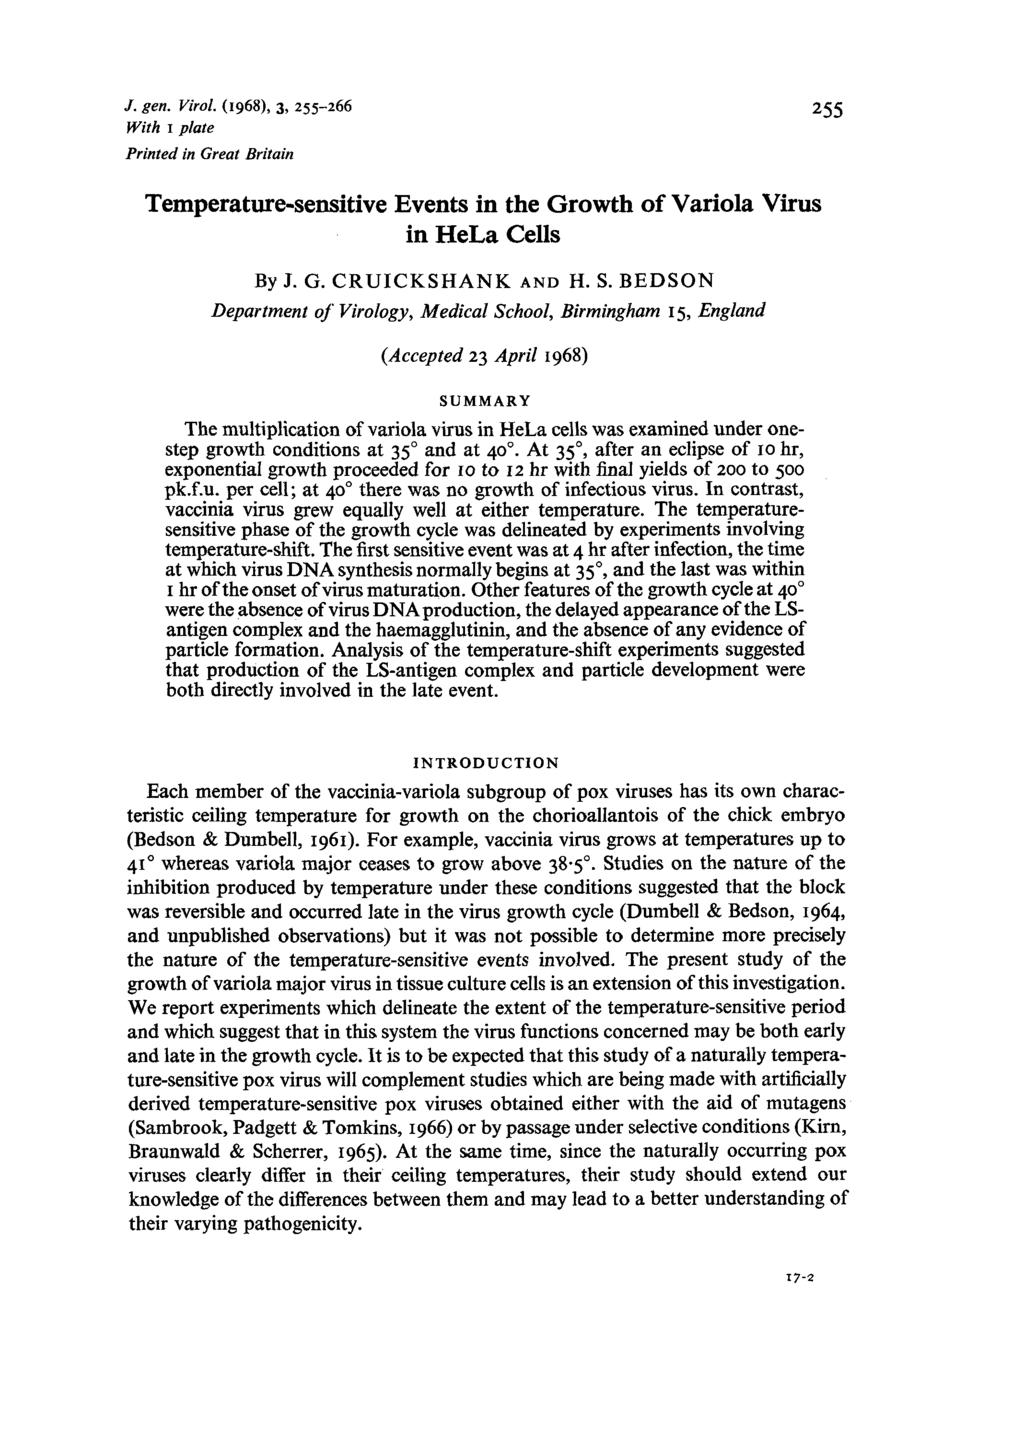 J. gen. Virol. (I968), 3, 255-266 With I plate Printed in Great Britain 255 Temperature-sensitive Events in the Growth of Variola Virus in HeLa Cells By J. G. CRUICKSHANK AND H. S.